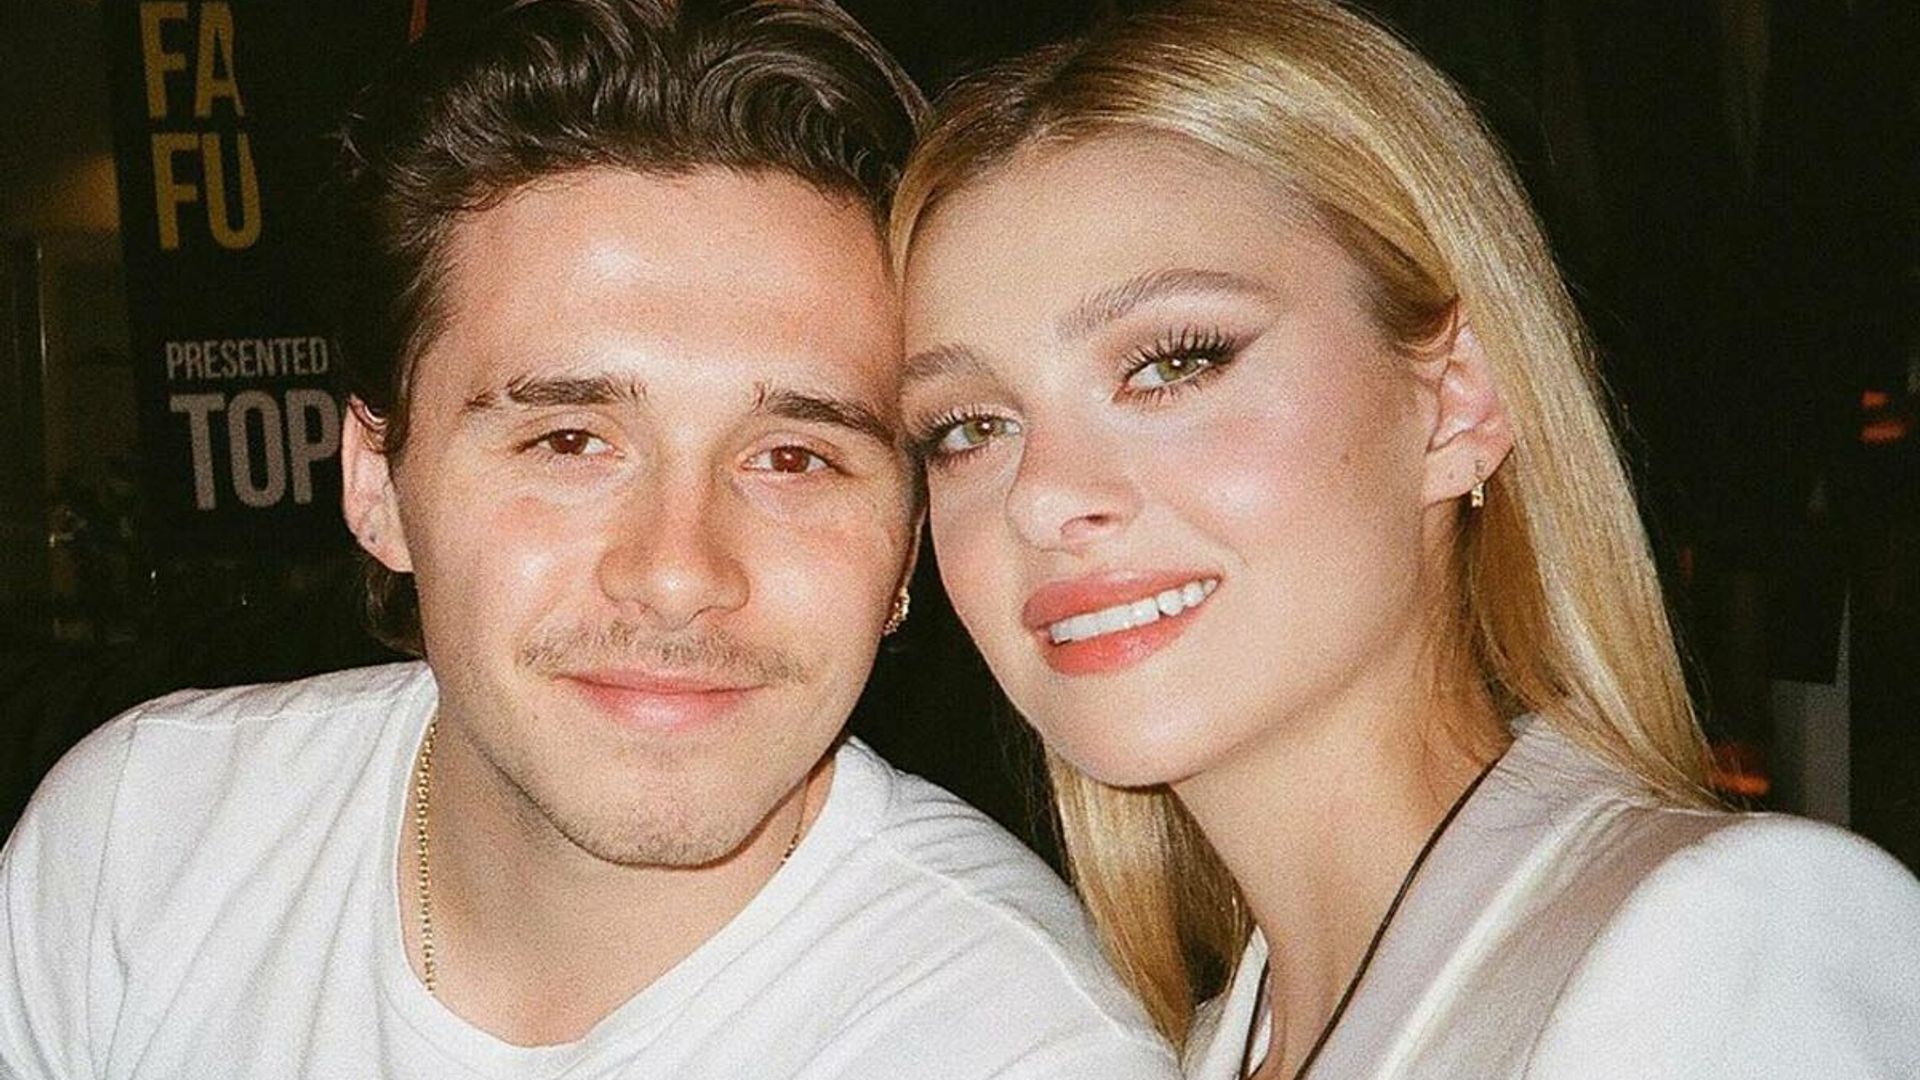 Brooklyn Beckham's unseen wedding photo featuring sister Harper revealed – and it's so special